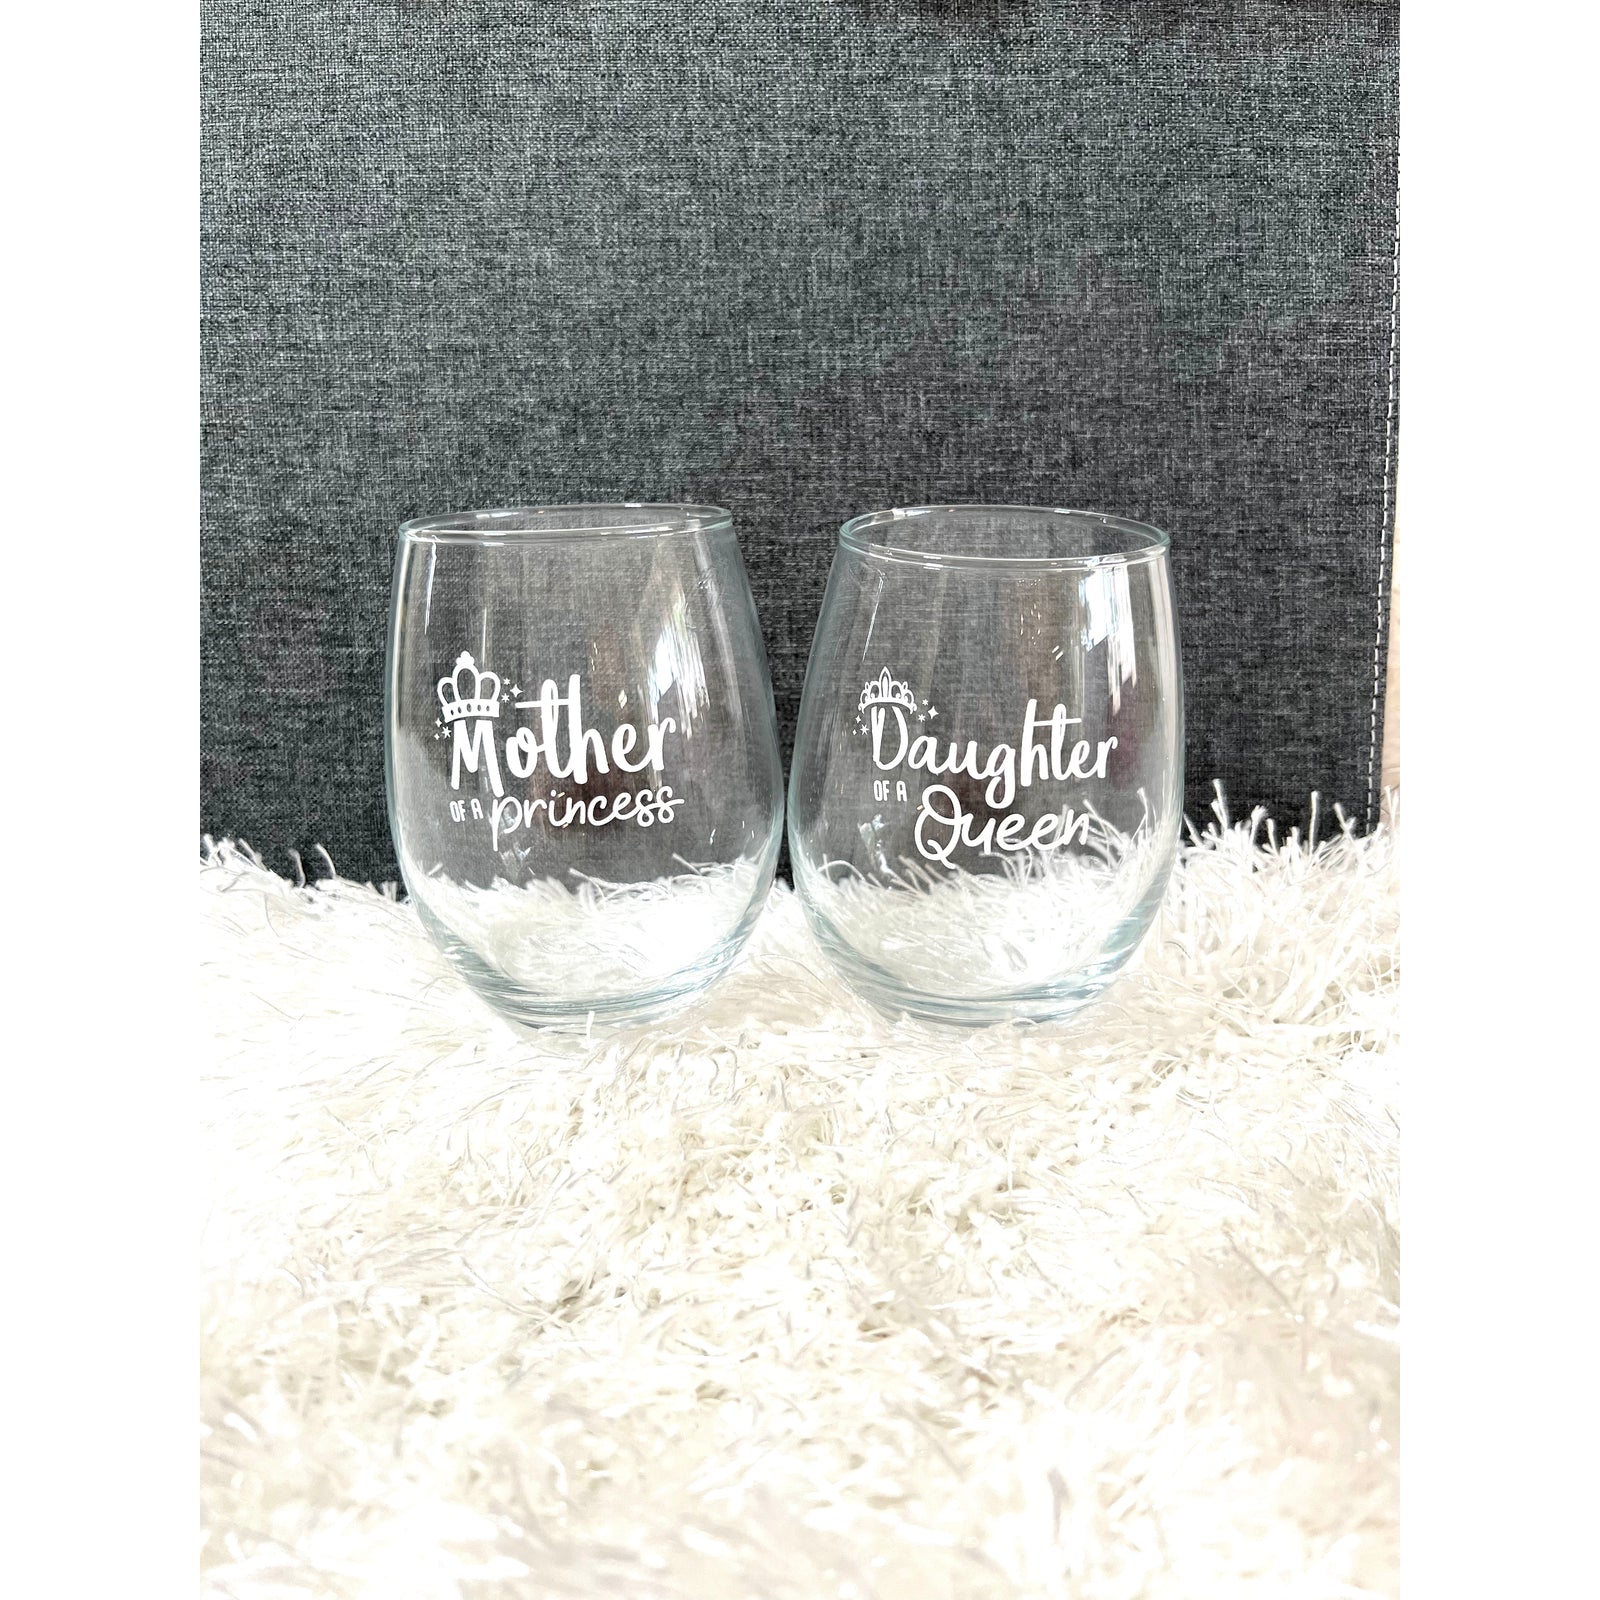 Mother of a princess, Daughter of a Queen 15oz Set of 2 NEW